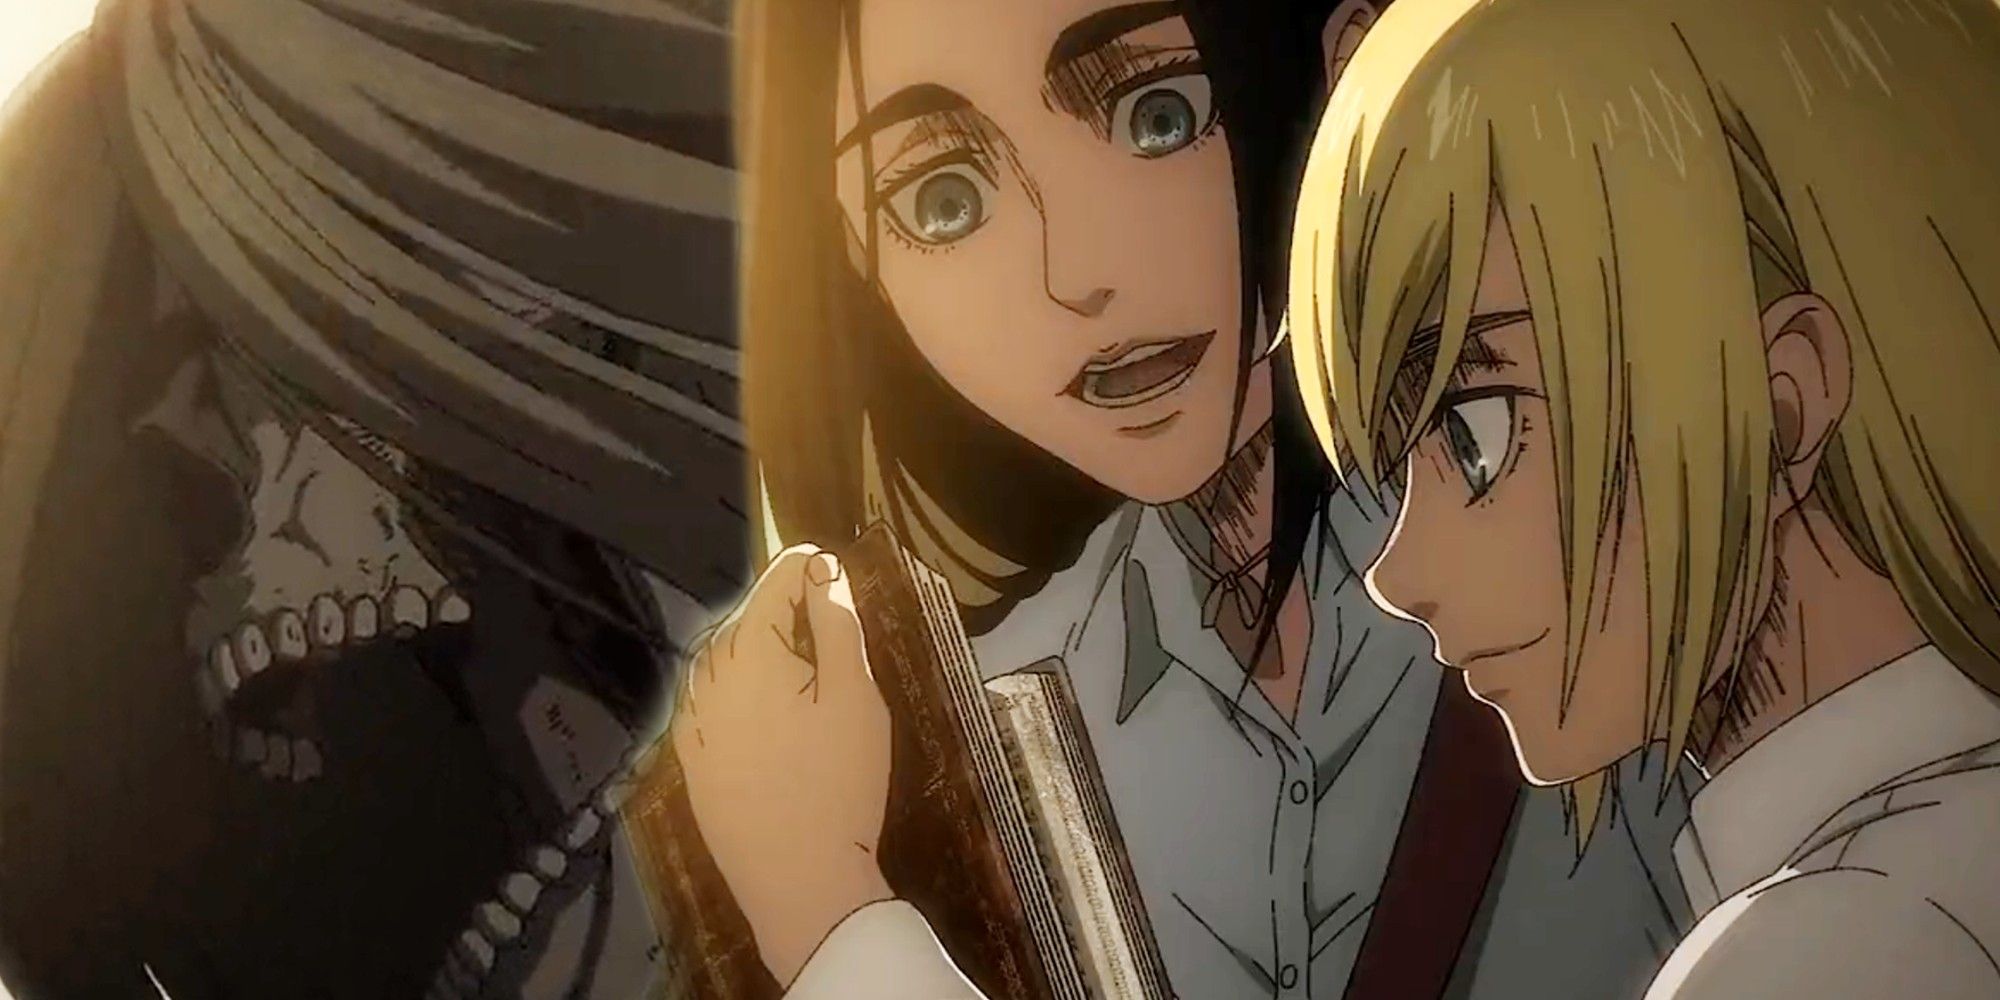 Attack on Titan Episode 80 Preview From You 2000 Years Ago